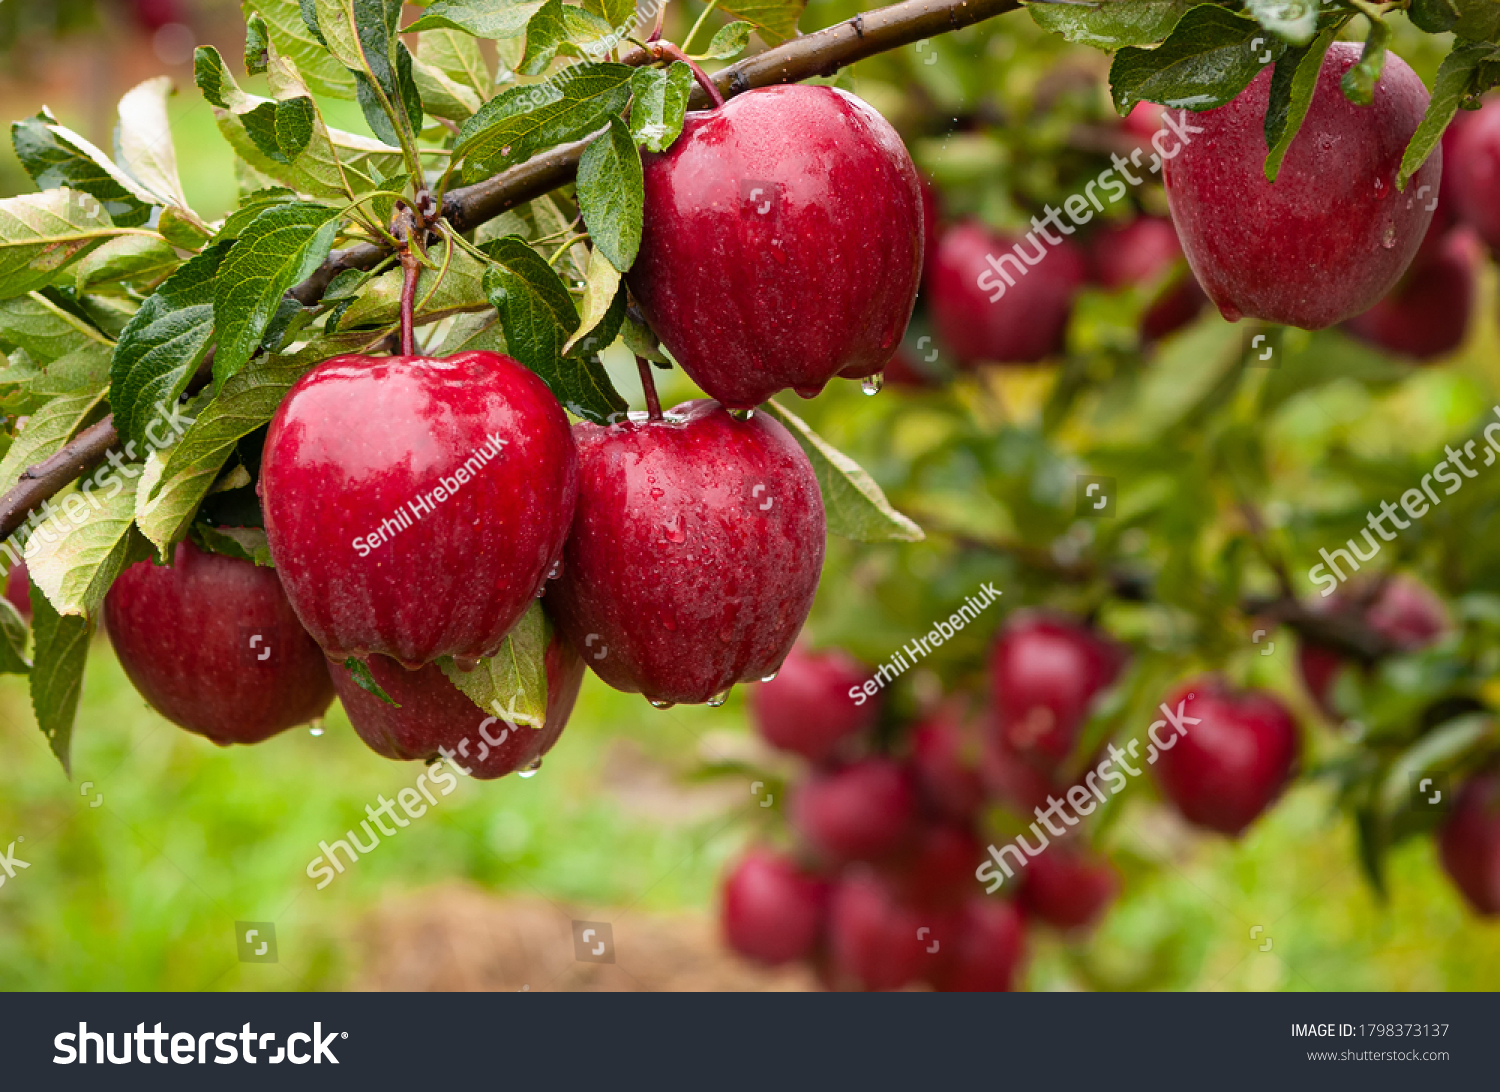 Autumn day. Rural garden. In the frame ripe red apples on a tree. It's raining Photographed in Ukraine,   #1798373137